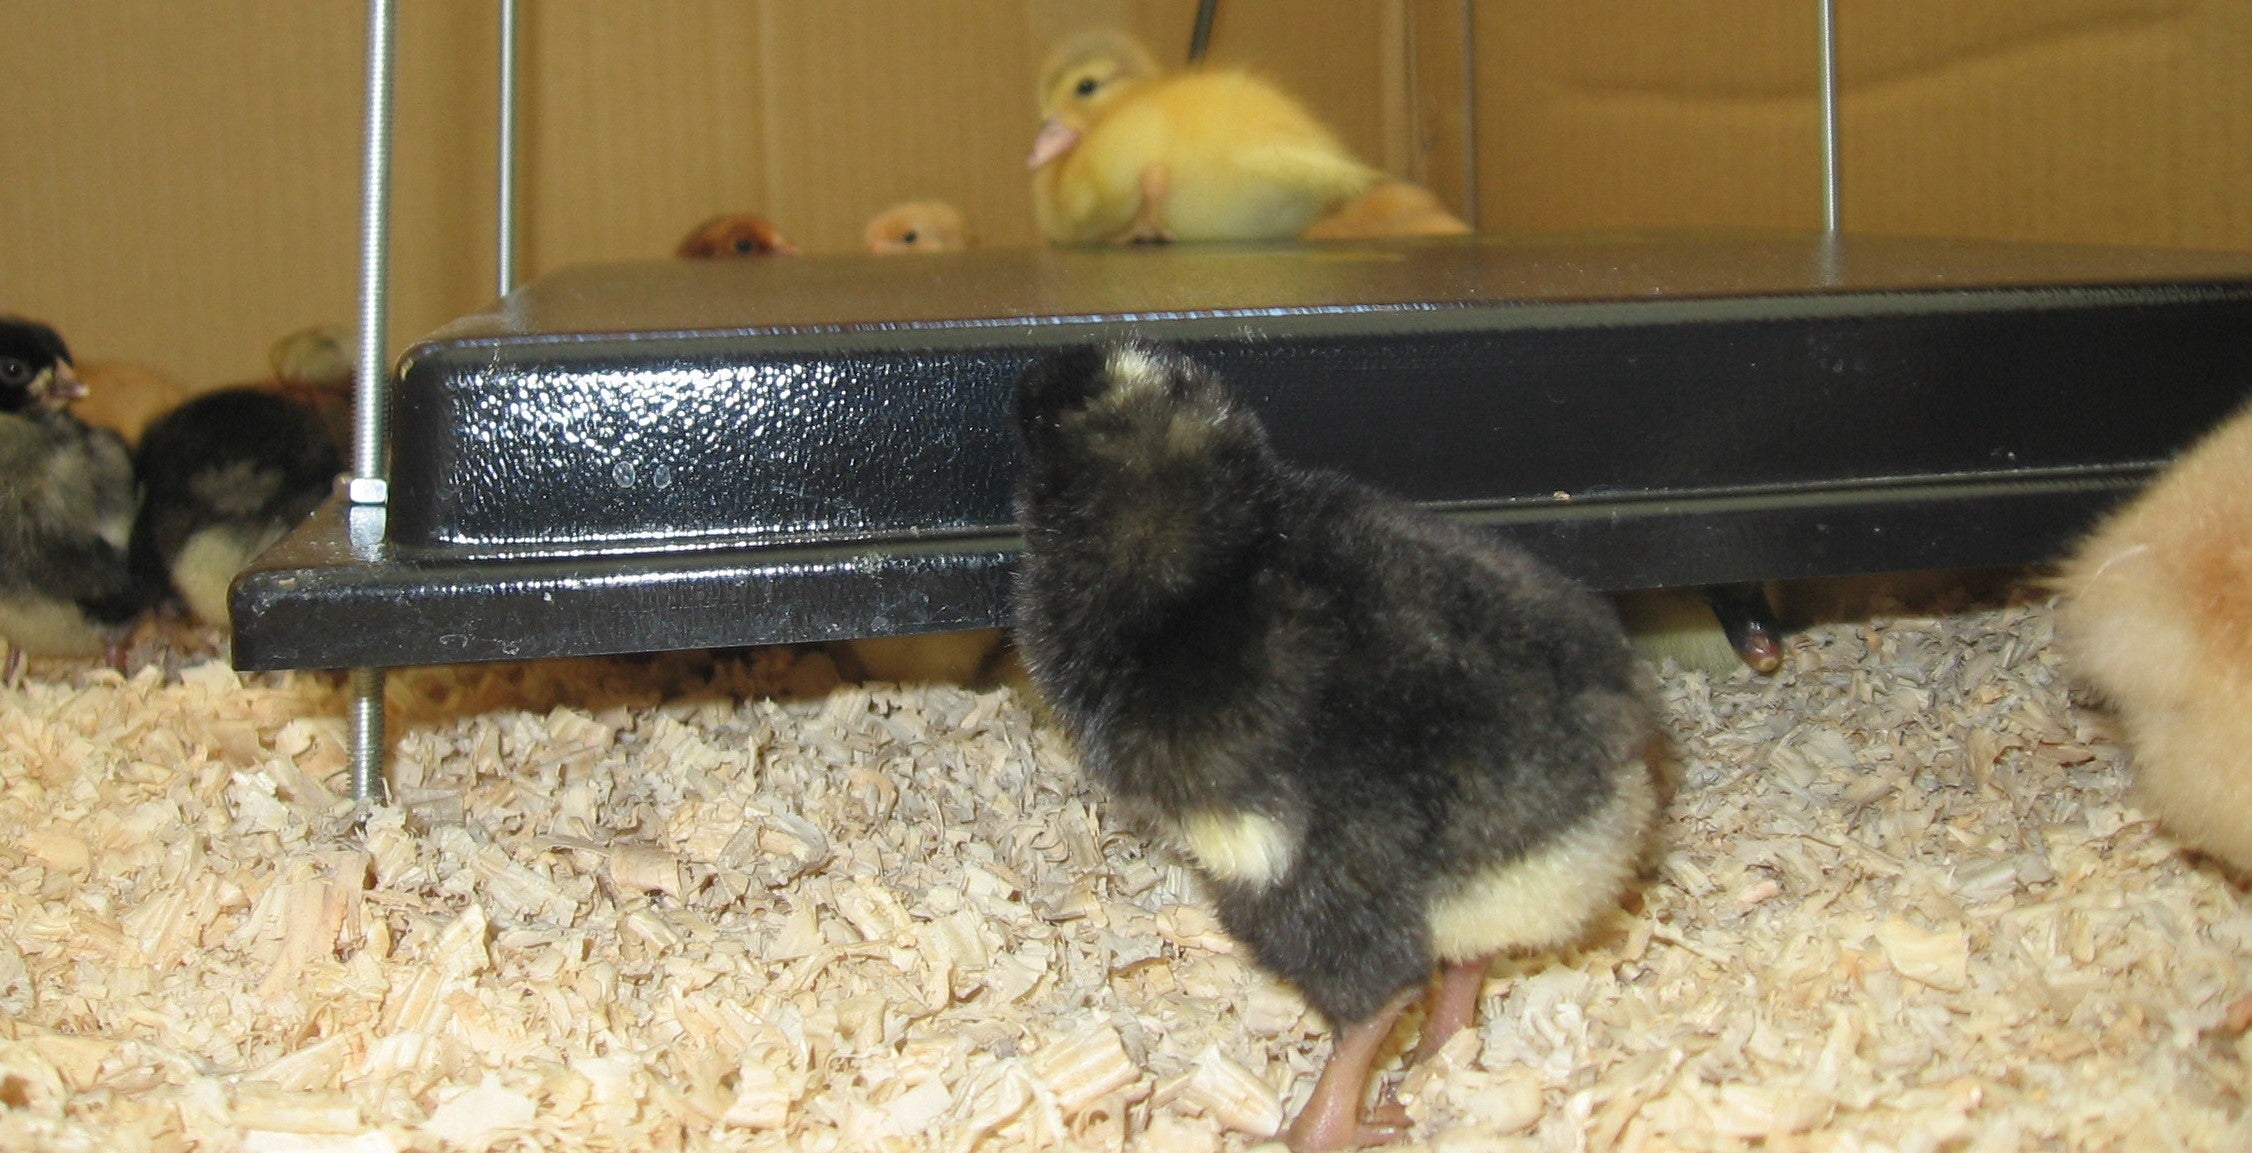 rearing chicks in a brooder is up close, hands on fun